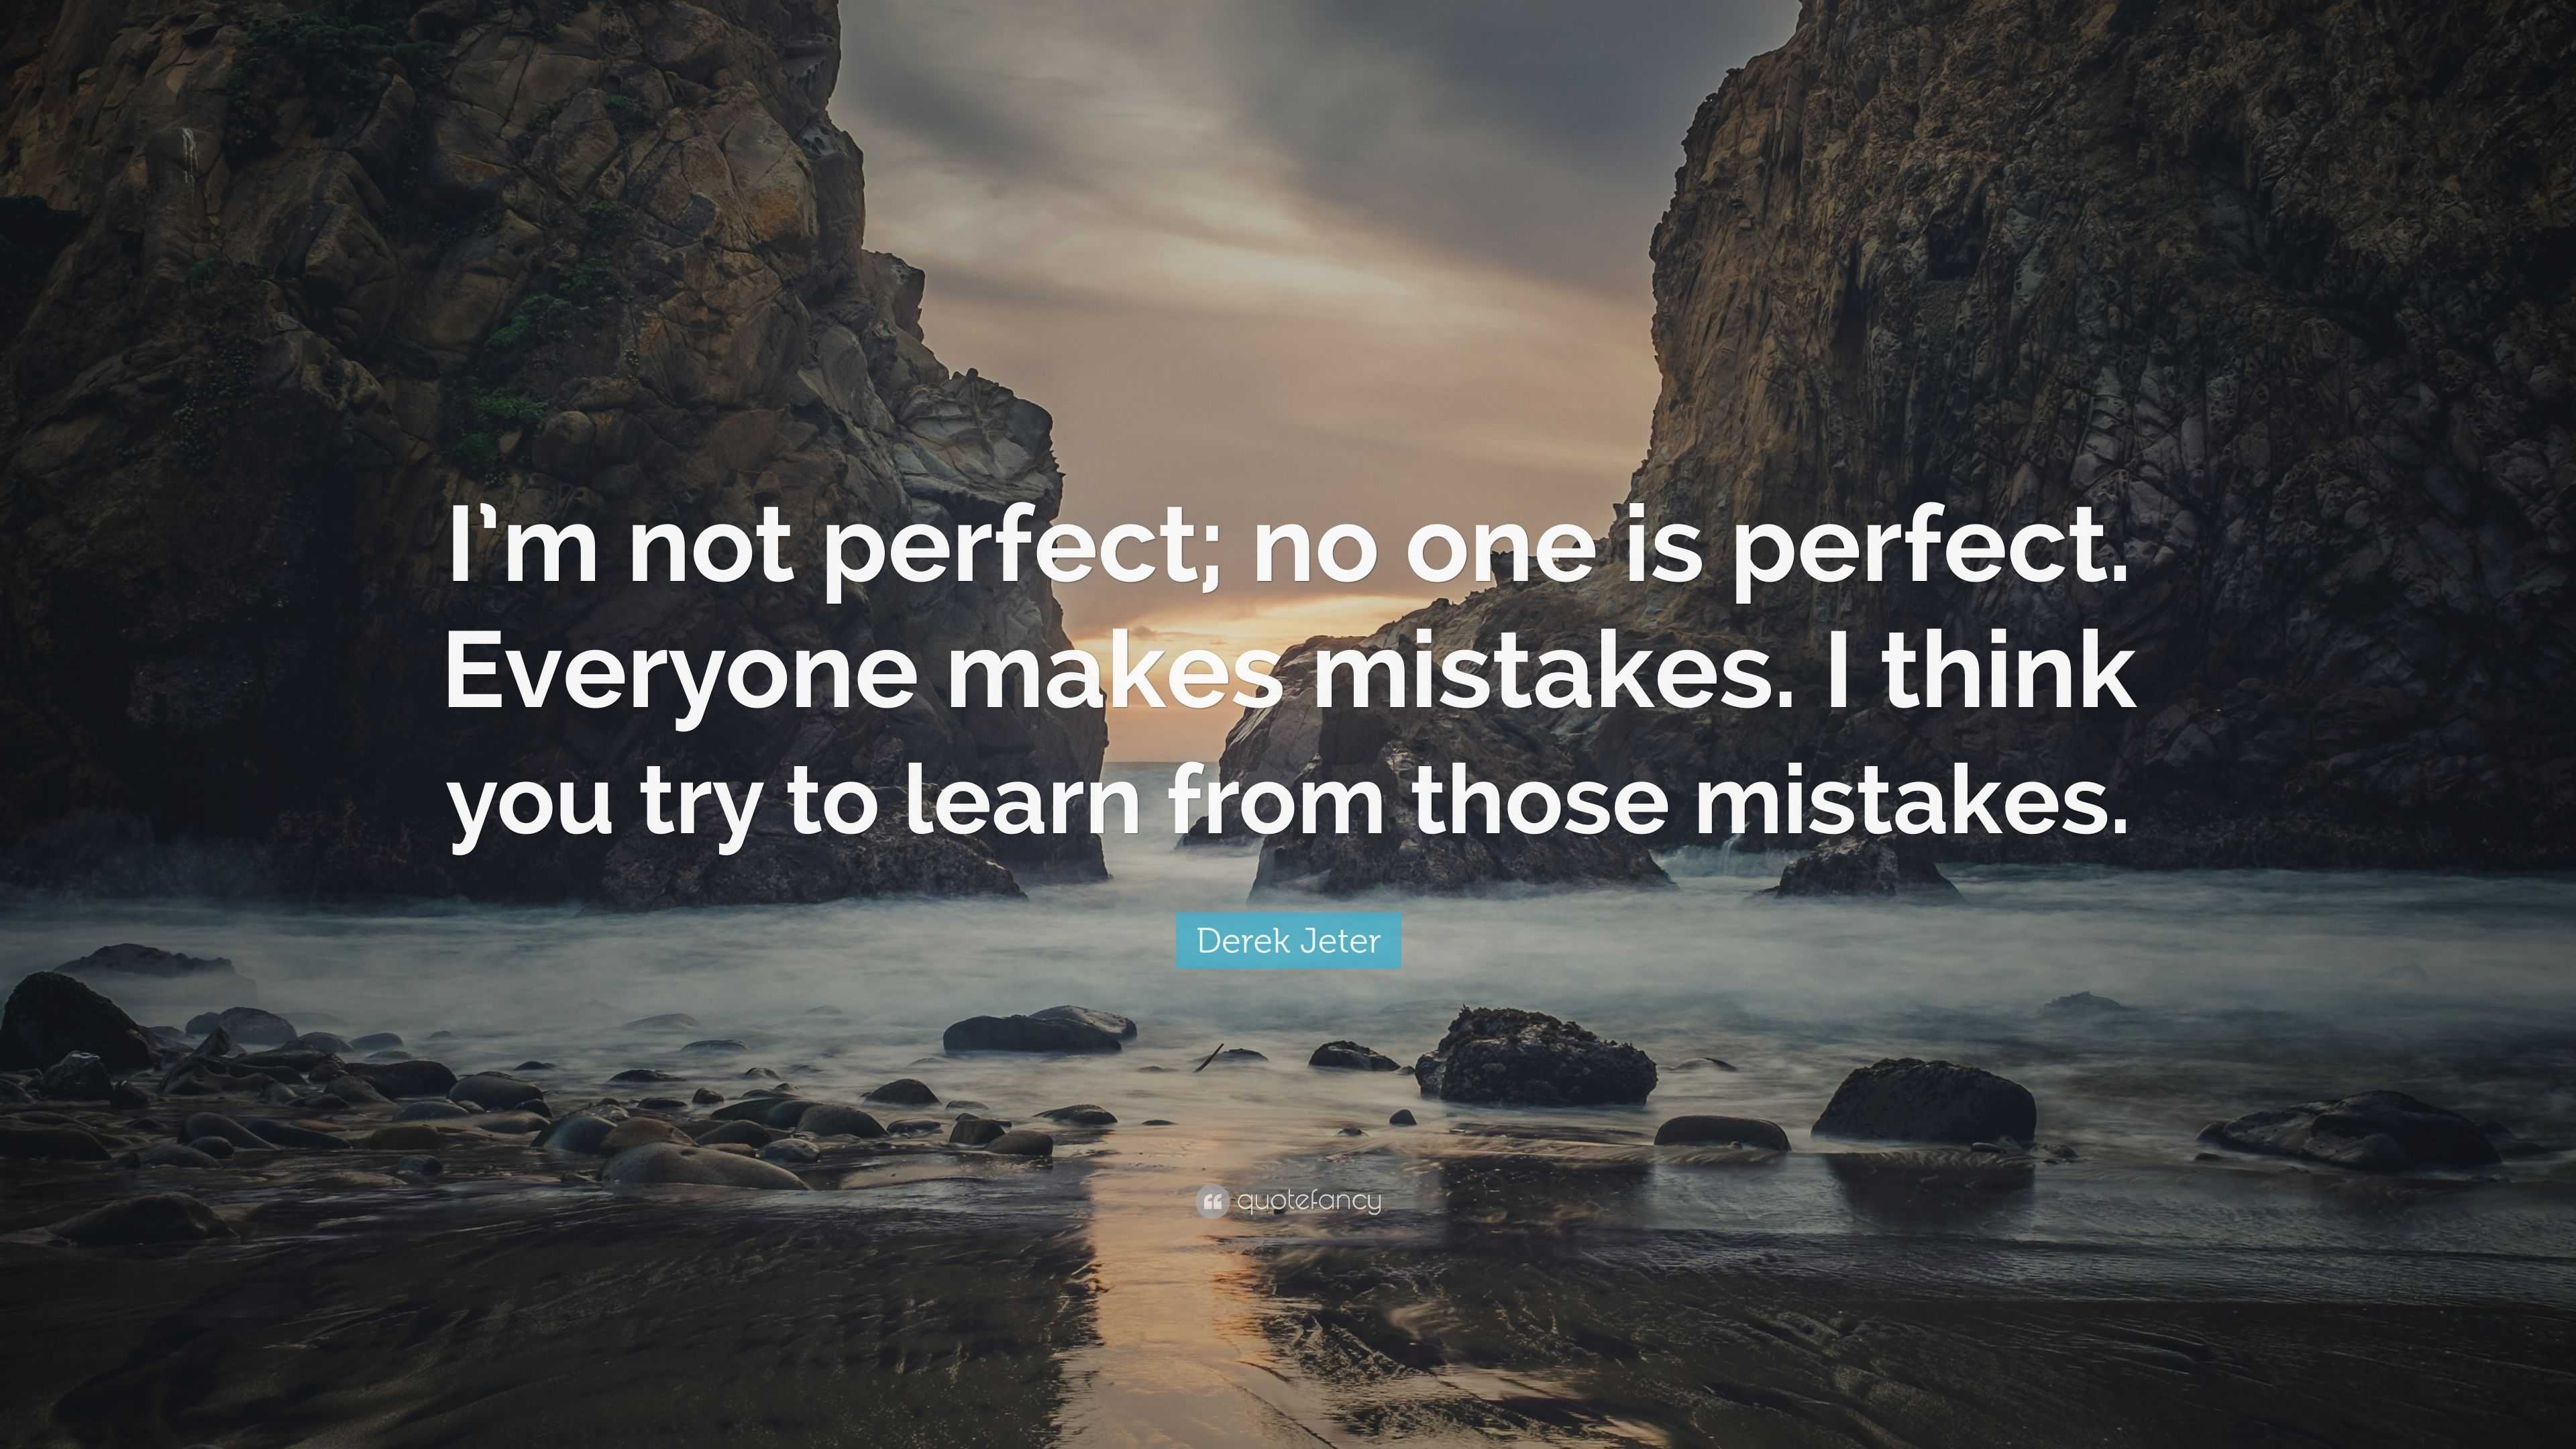 Derek Jeter Quote: “I’m not perfect; no one is perfect. Everyone makes